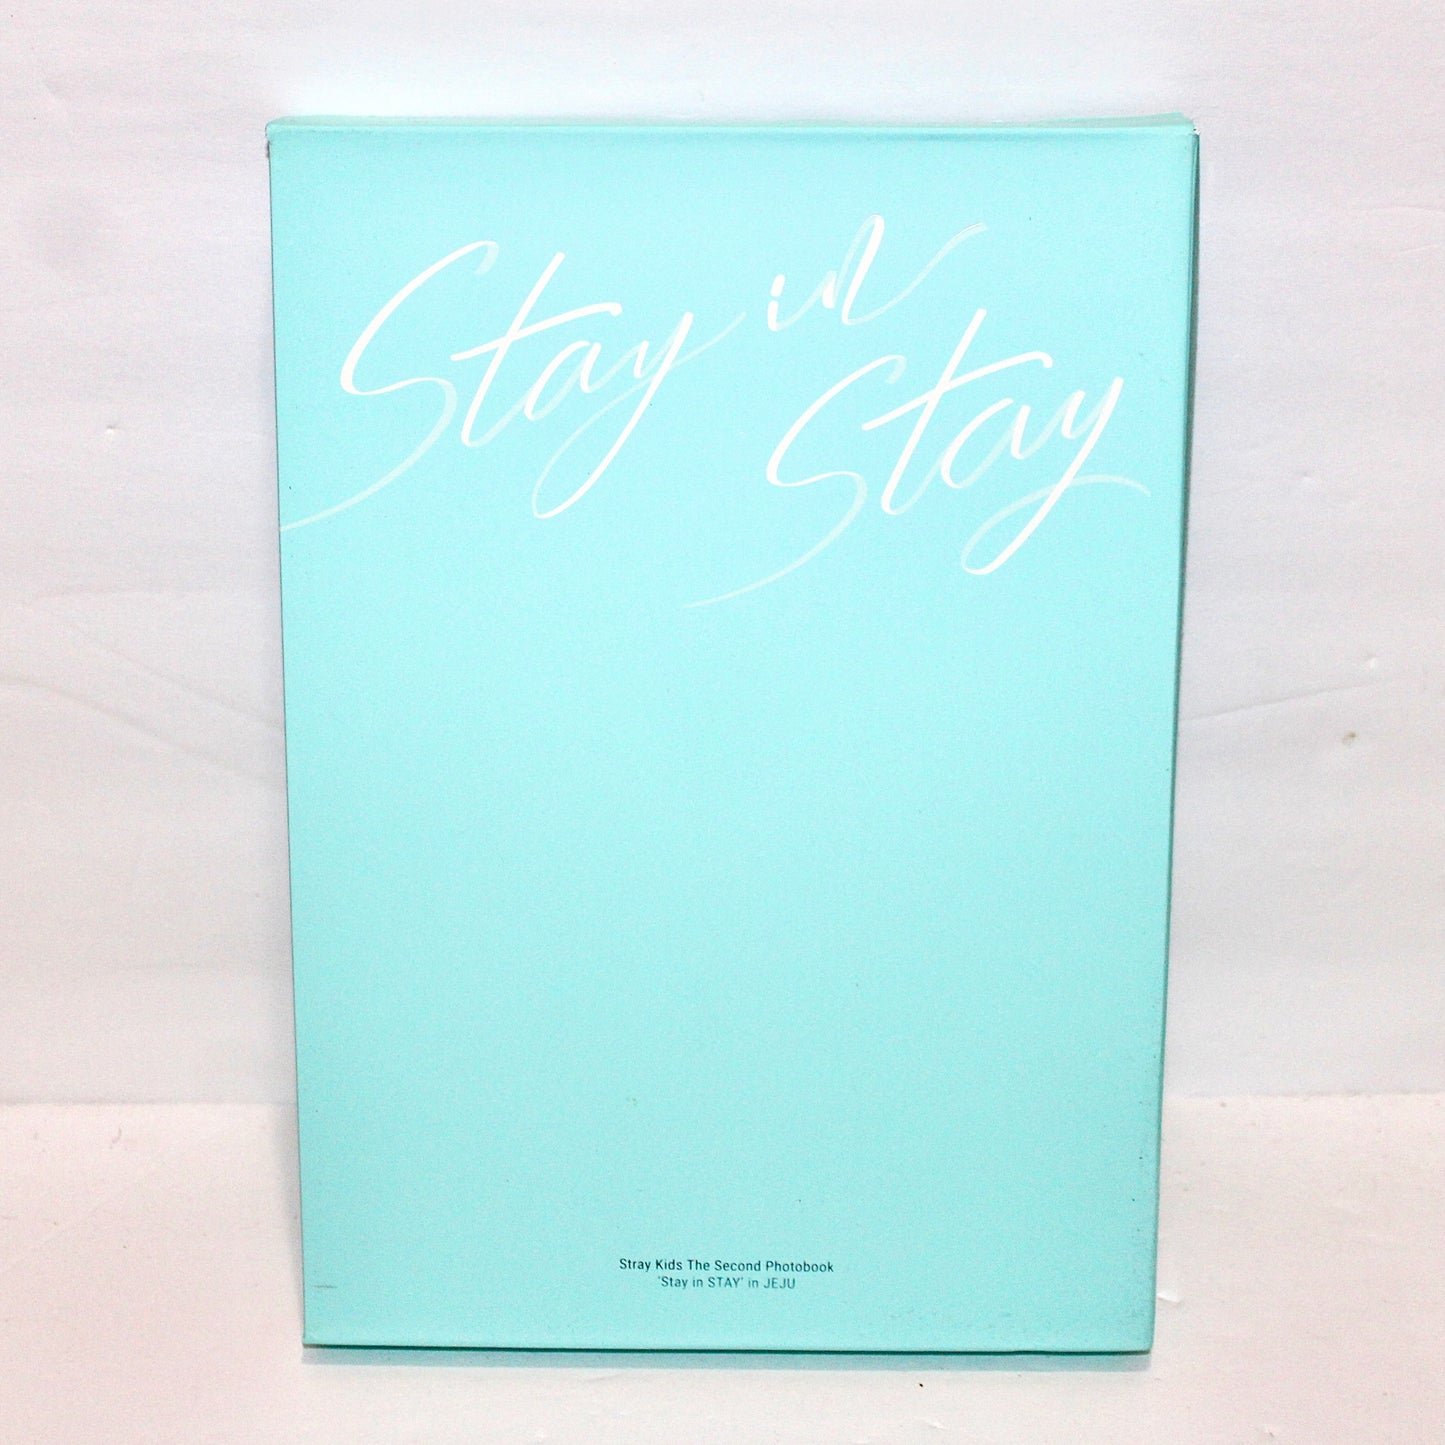 STRAY KIDS The Second Photobook: 'Stay In STAY' in JEJU Exhibition